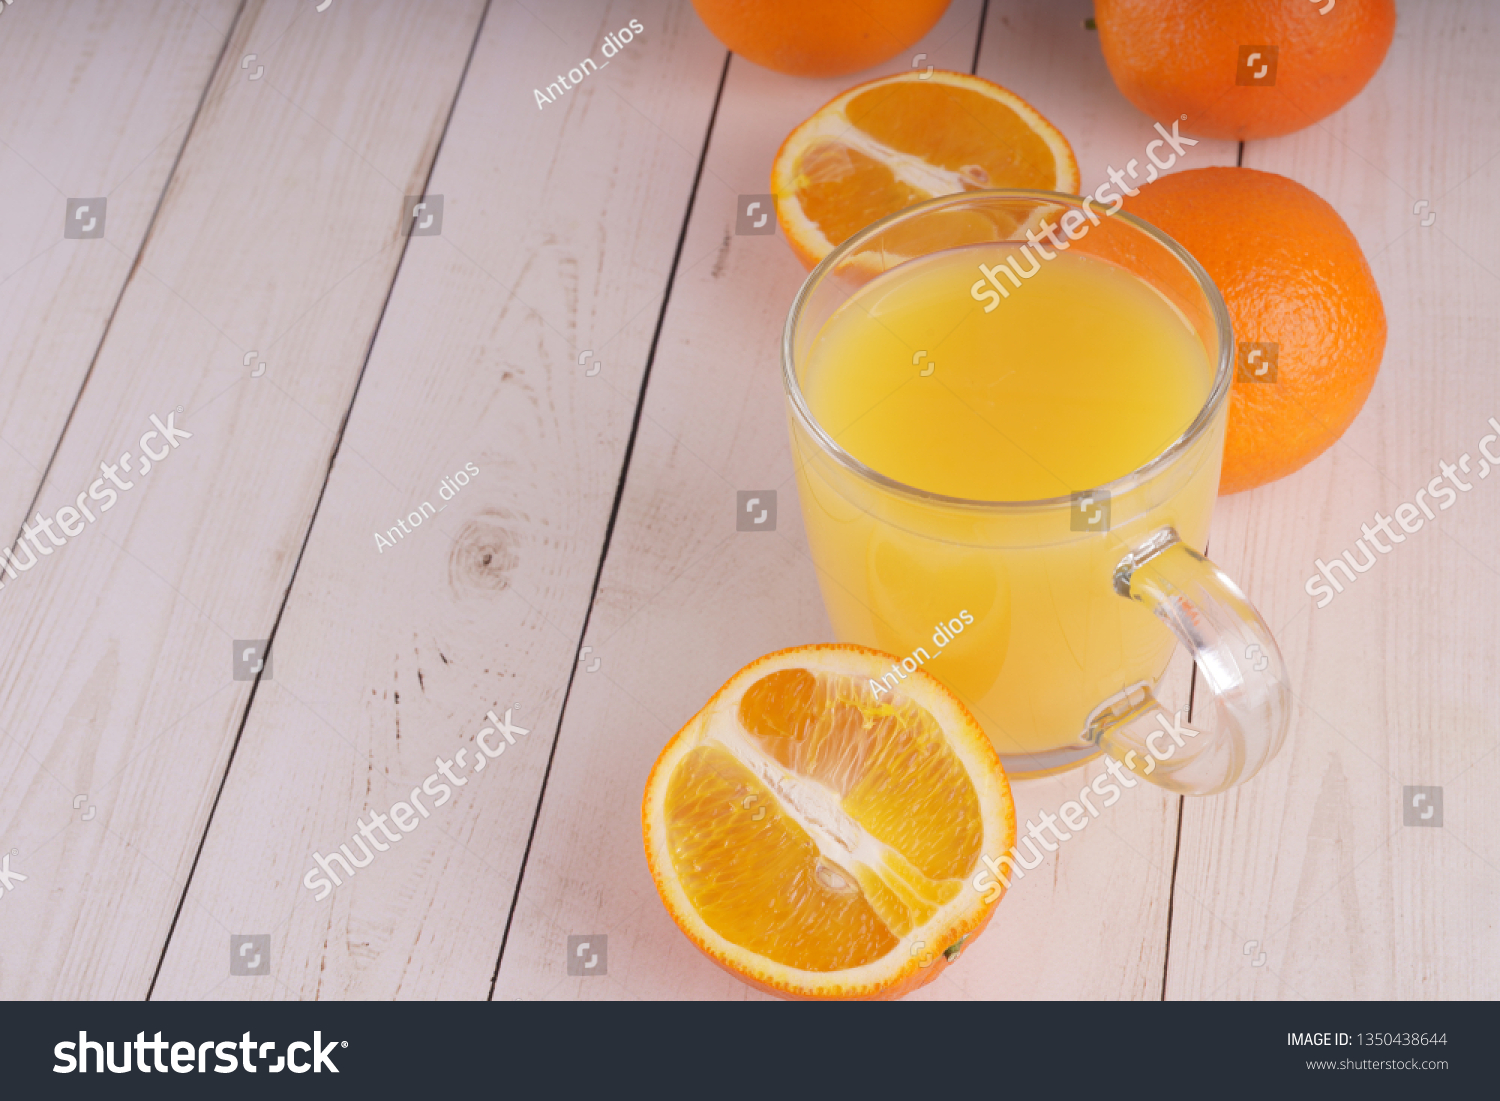 Glass of freshly squeezed orange juice standing on light background with a fresh oranges.  Healthy lifestyle concept. Copy space for text. #1350438644